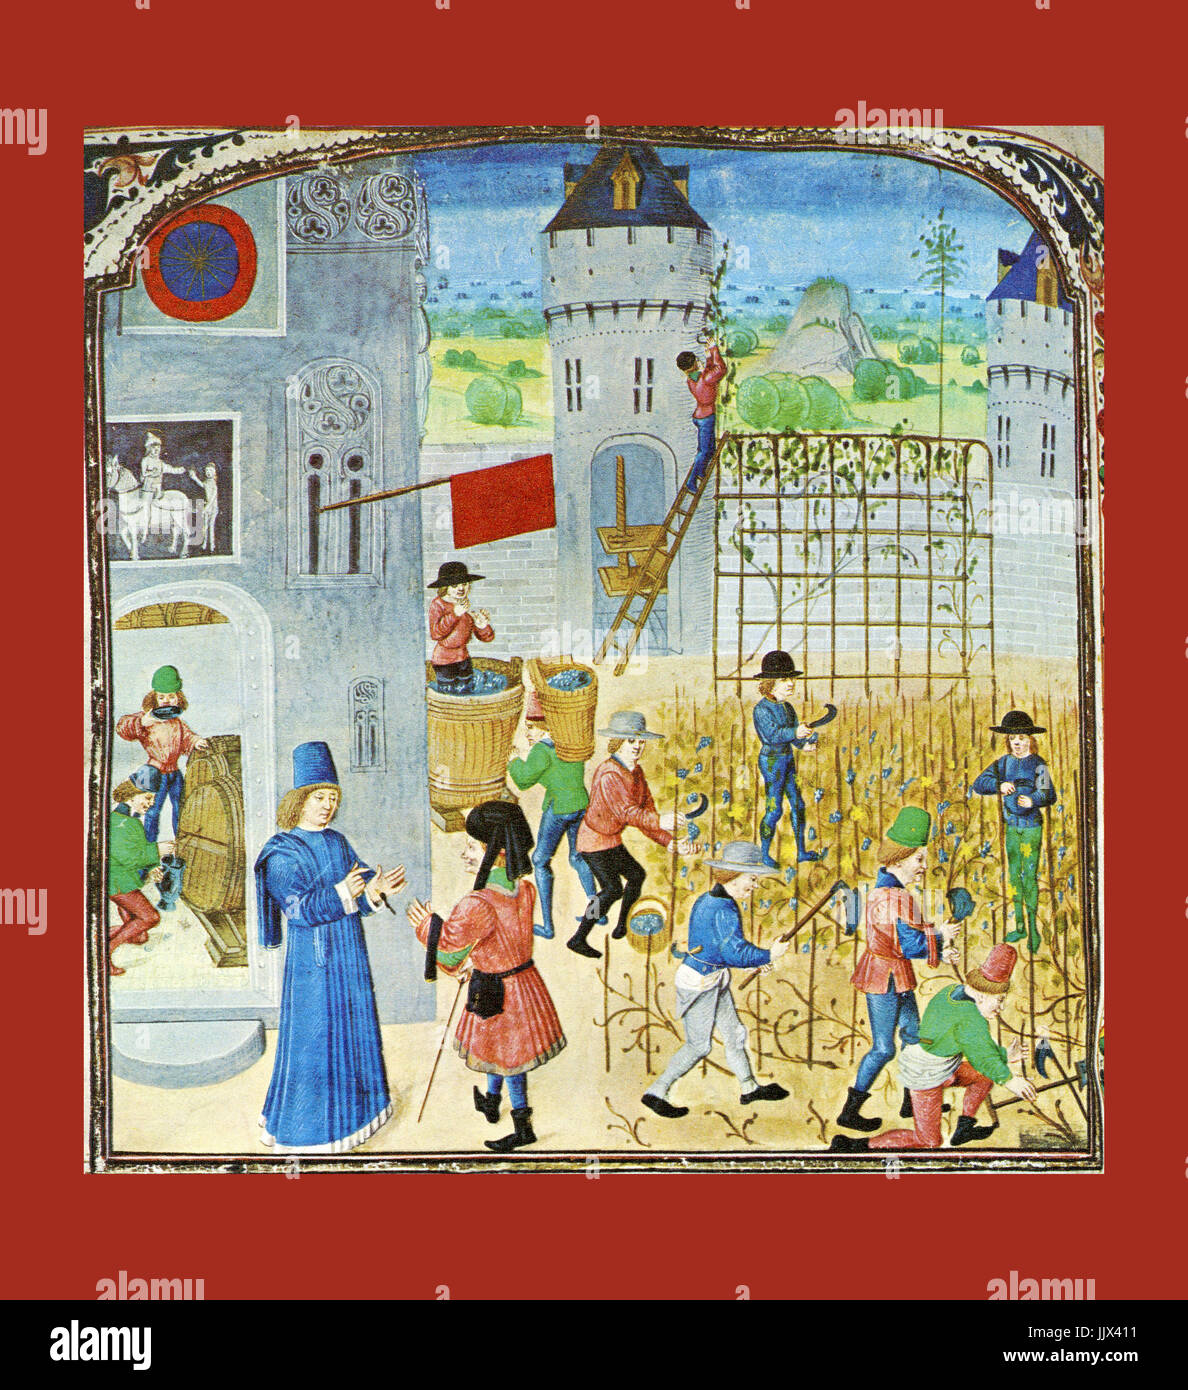 HISTORIC OLD GRAPE HARVEST / WINE PRODUCTION ILLUMINATED ILLUSTRATION DESIGN IN THE 15TH CENTURY by Pierre de Crescens 'Livre des Profits Champetres' showing the stages in vine cultivation during The Middle Ages Stock Photo